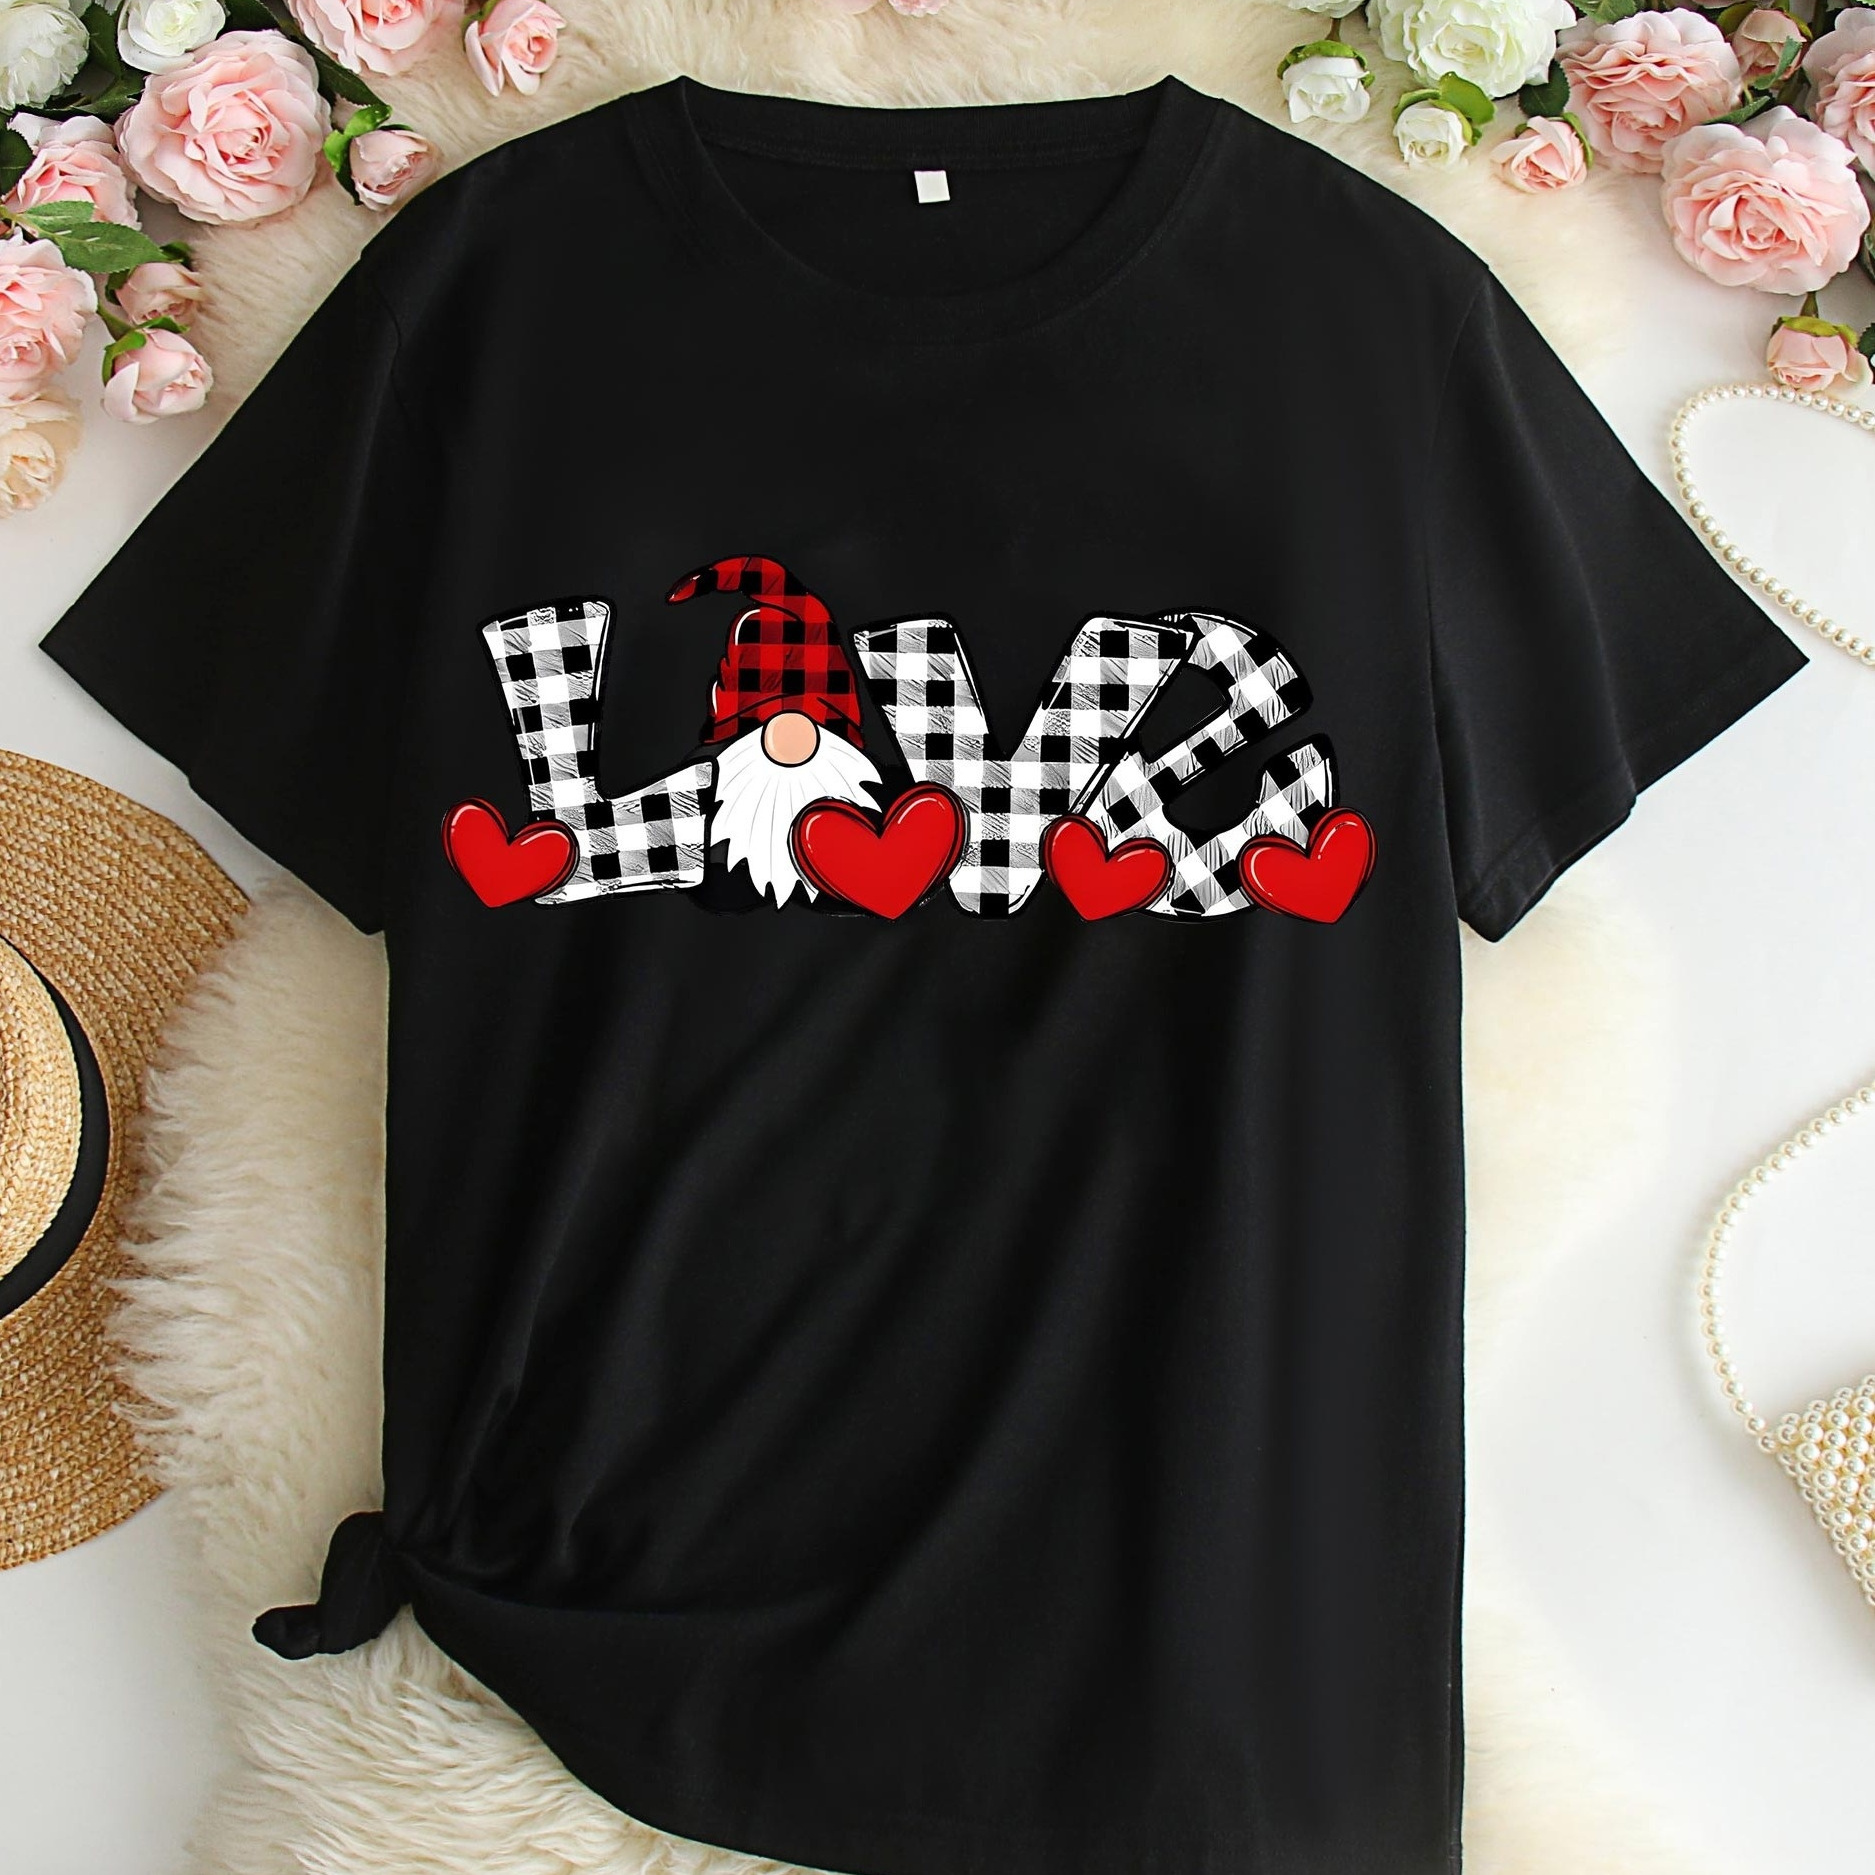 

Plus Size Graphic Print T-shirt, Short Sleeve Crew Neck Casual Top For Summer & Spring, Women's Plus Size Clothing